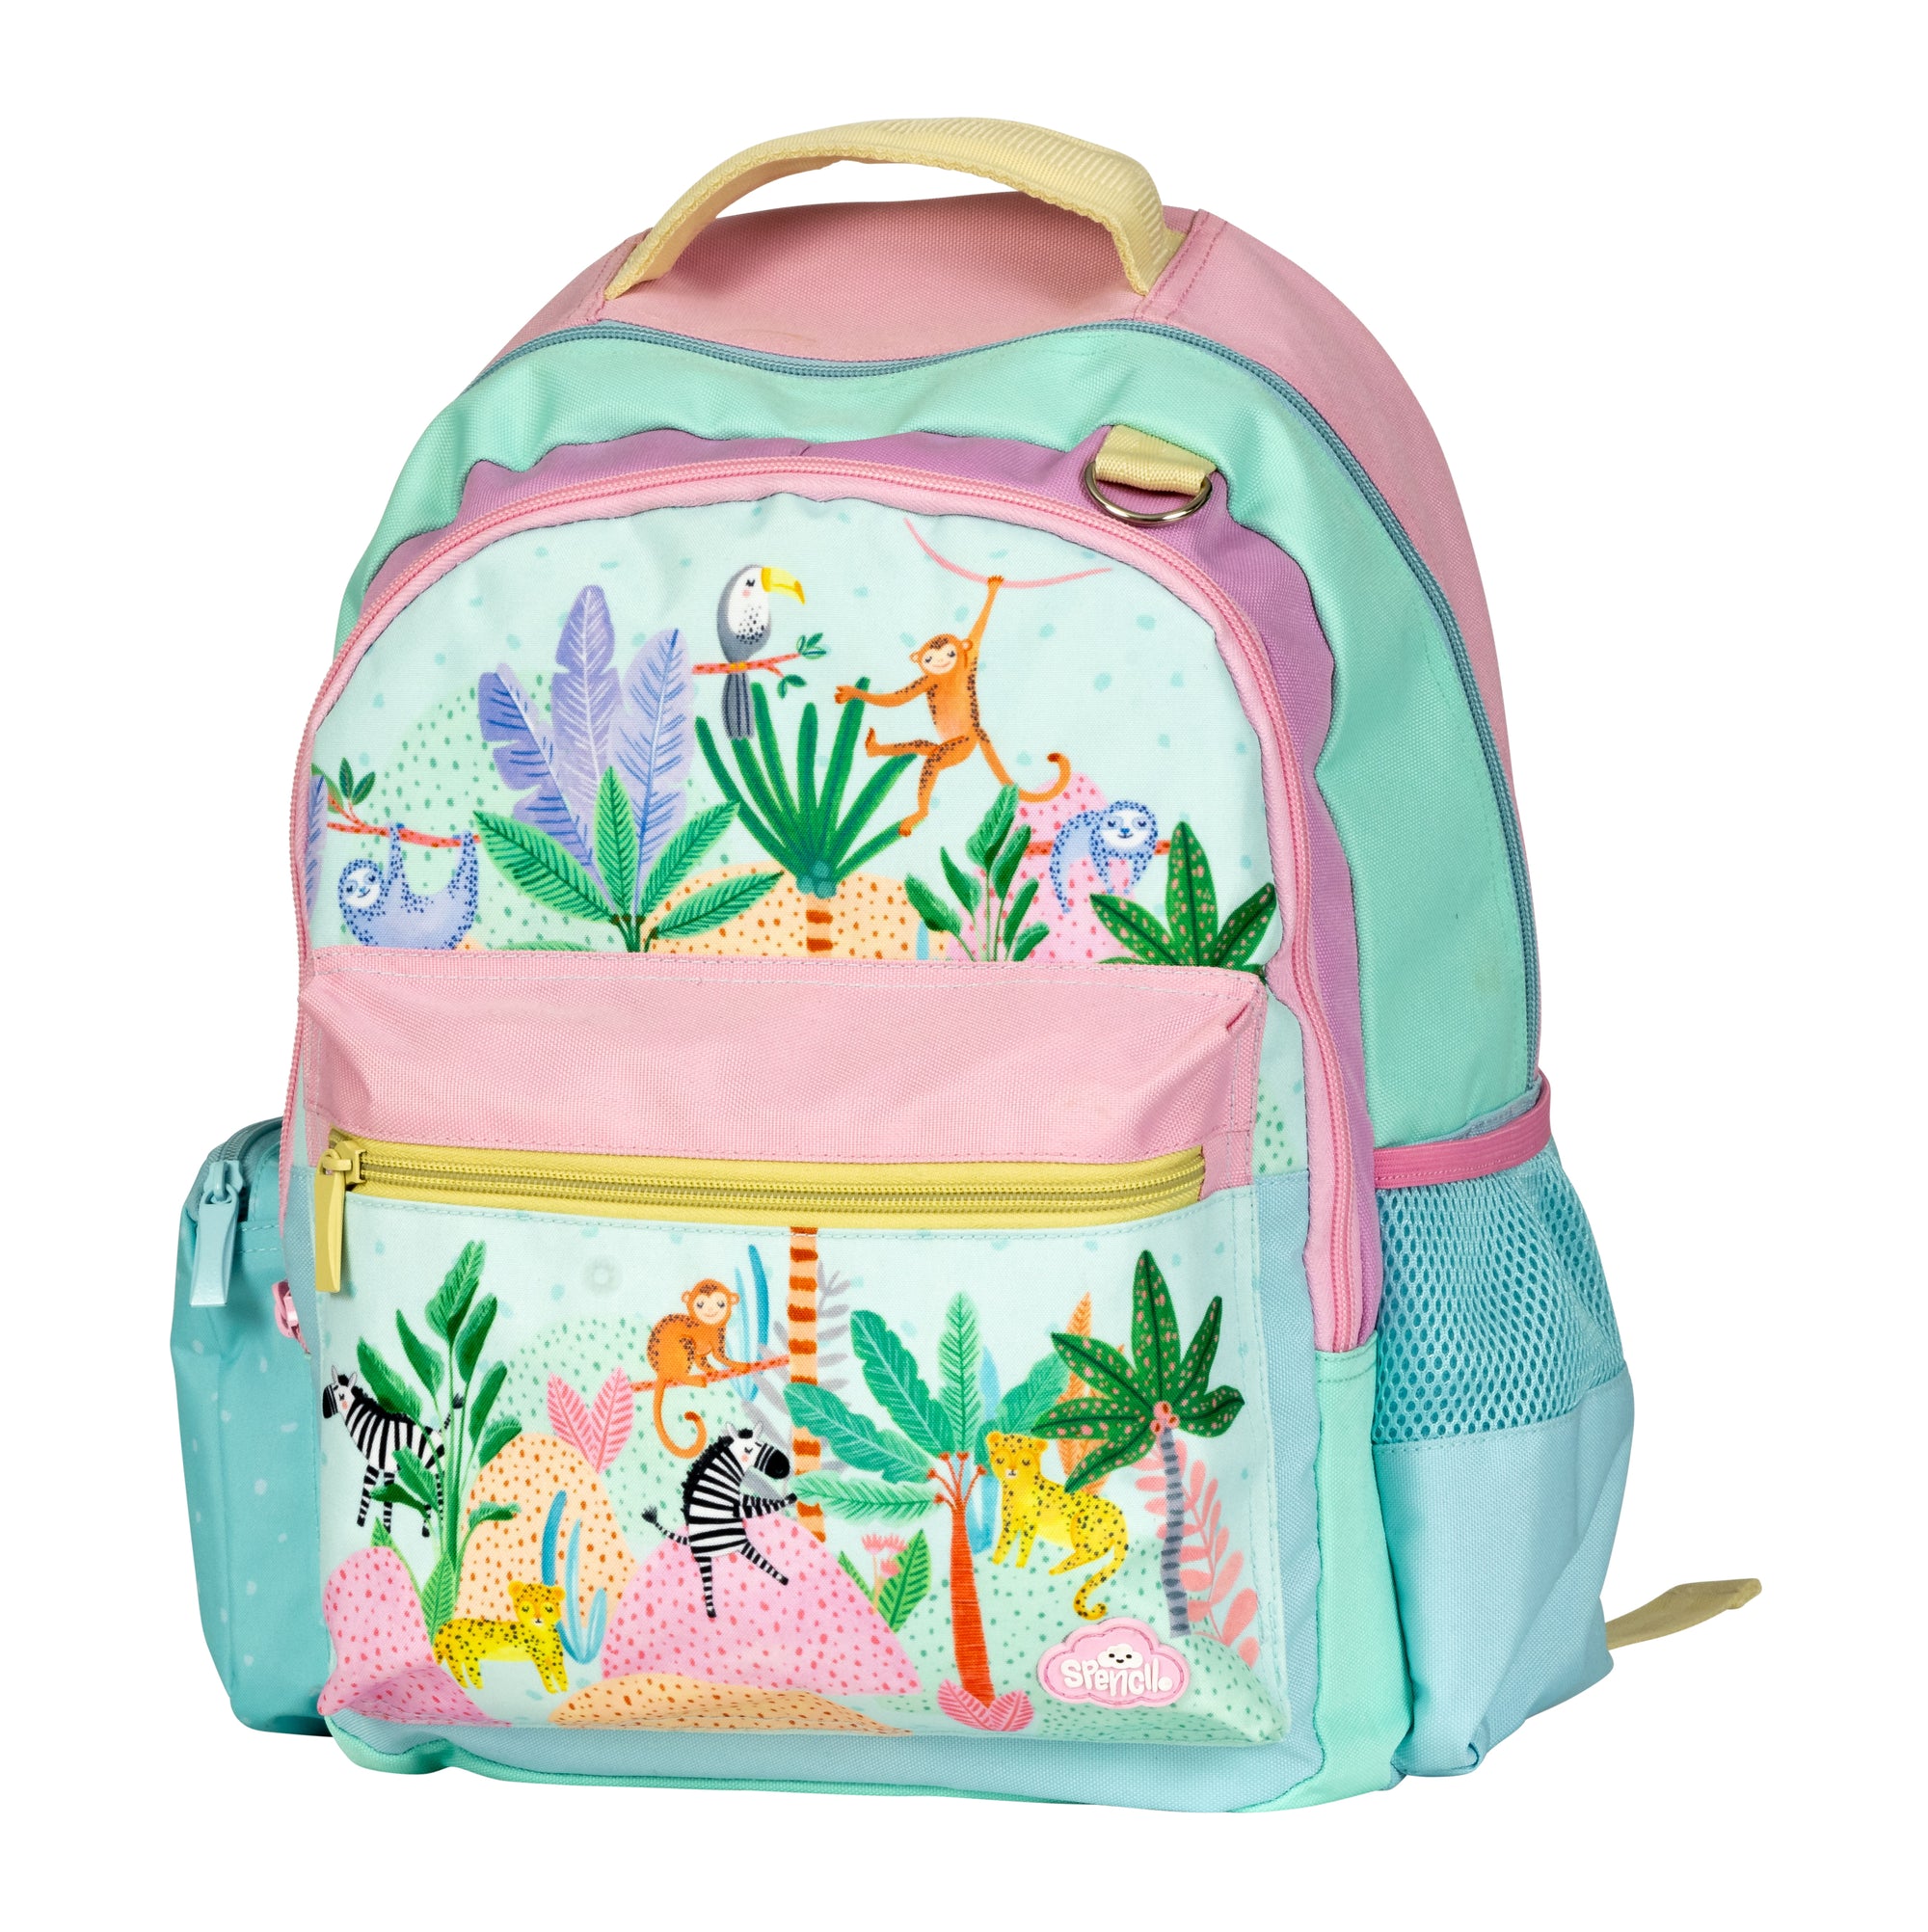 Kids Back pack - angus and dudkley